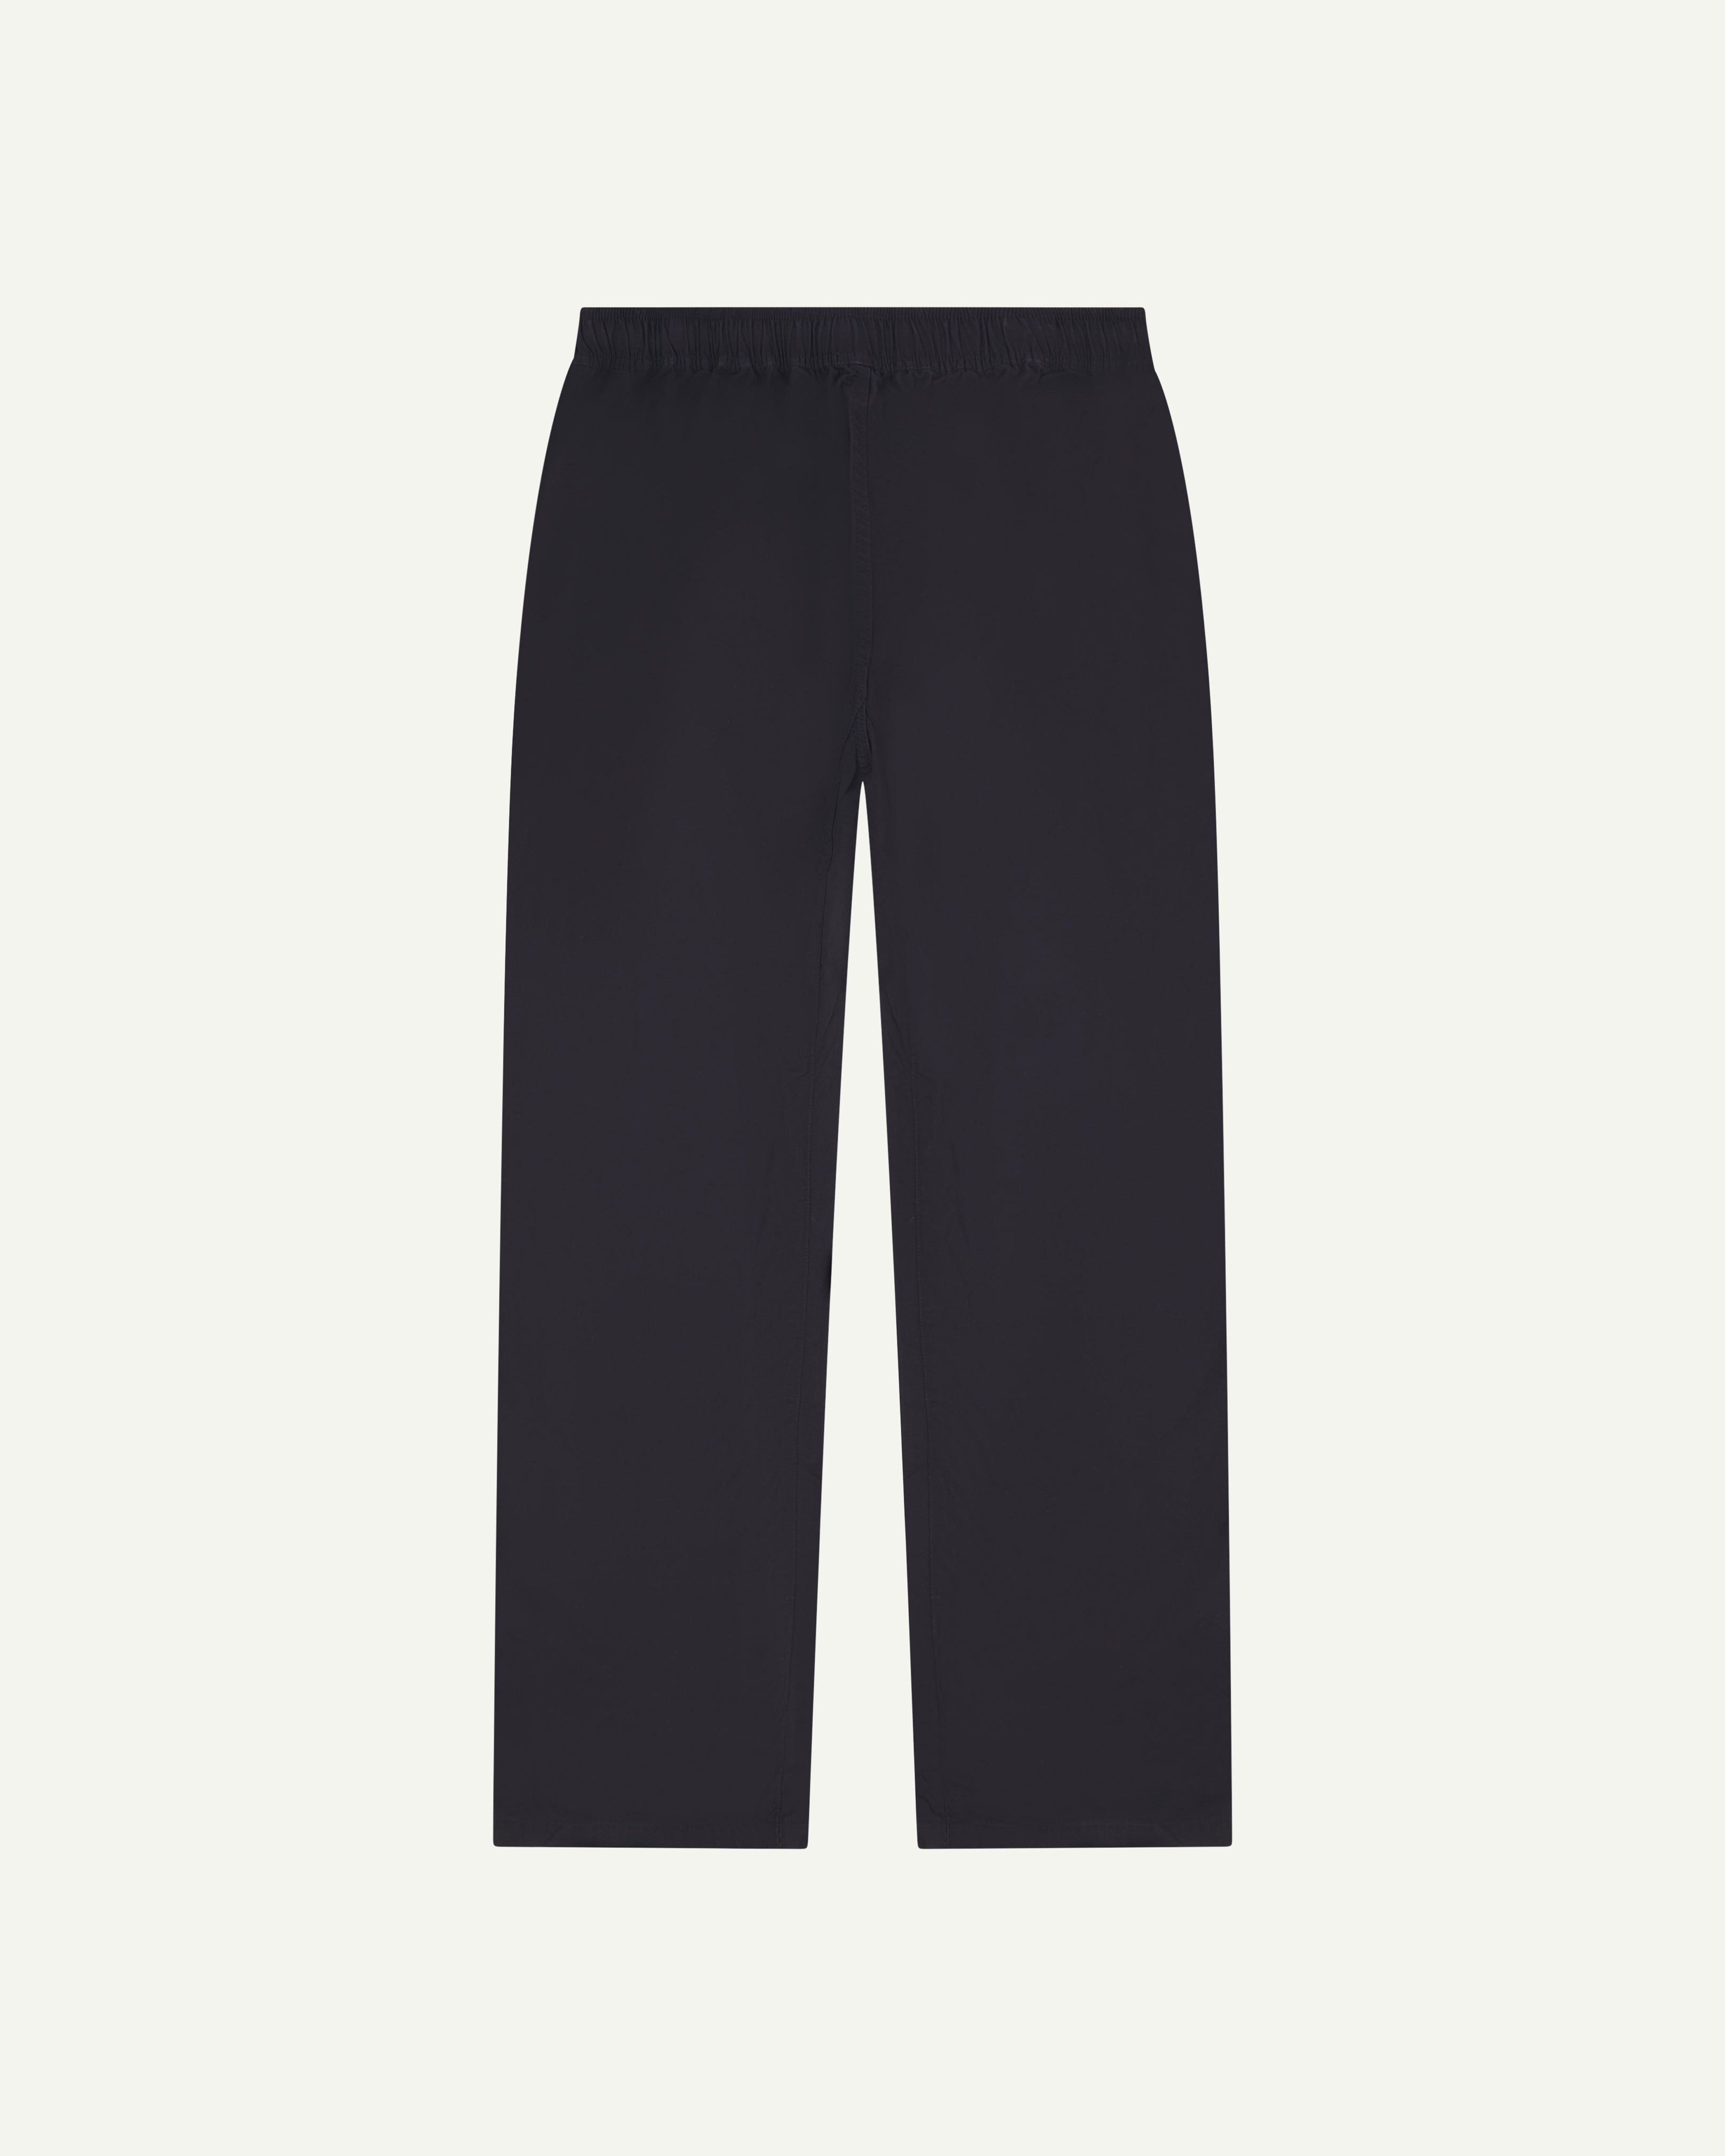 Flat back shot of the Uskees 5020 lightweight utility pants in midnight blue showing drawstring waist